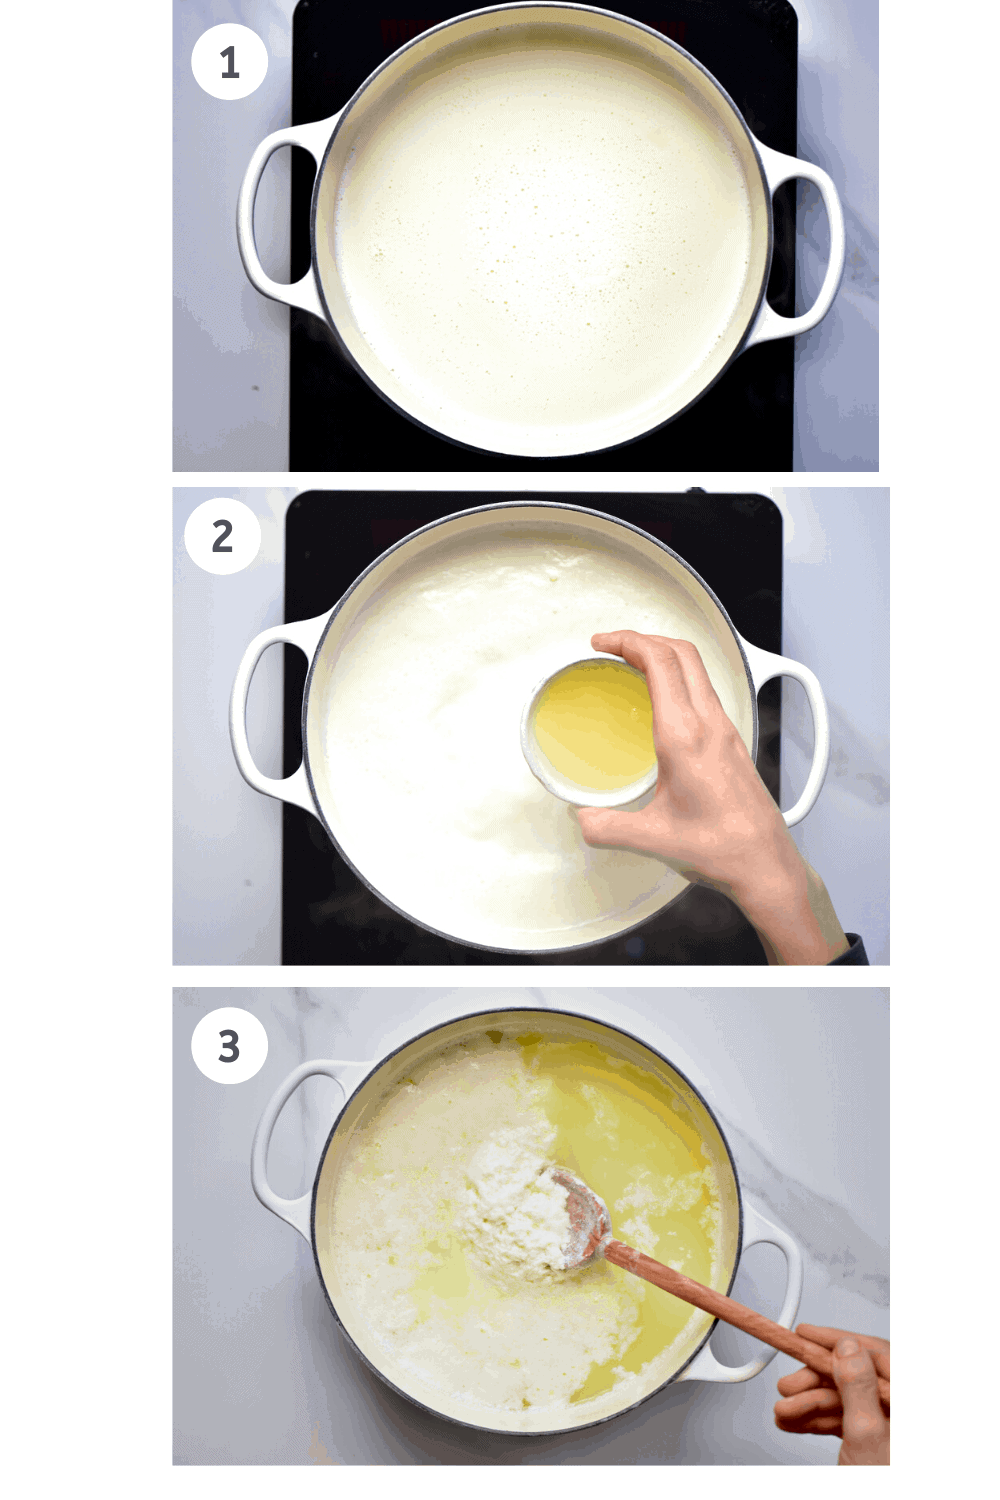 how to make paneer at home. curdling milk